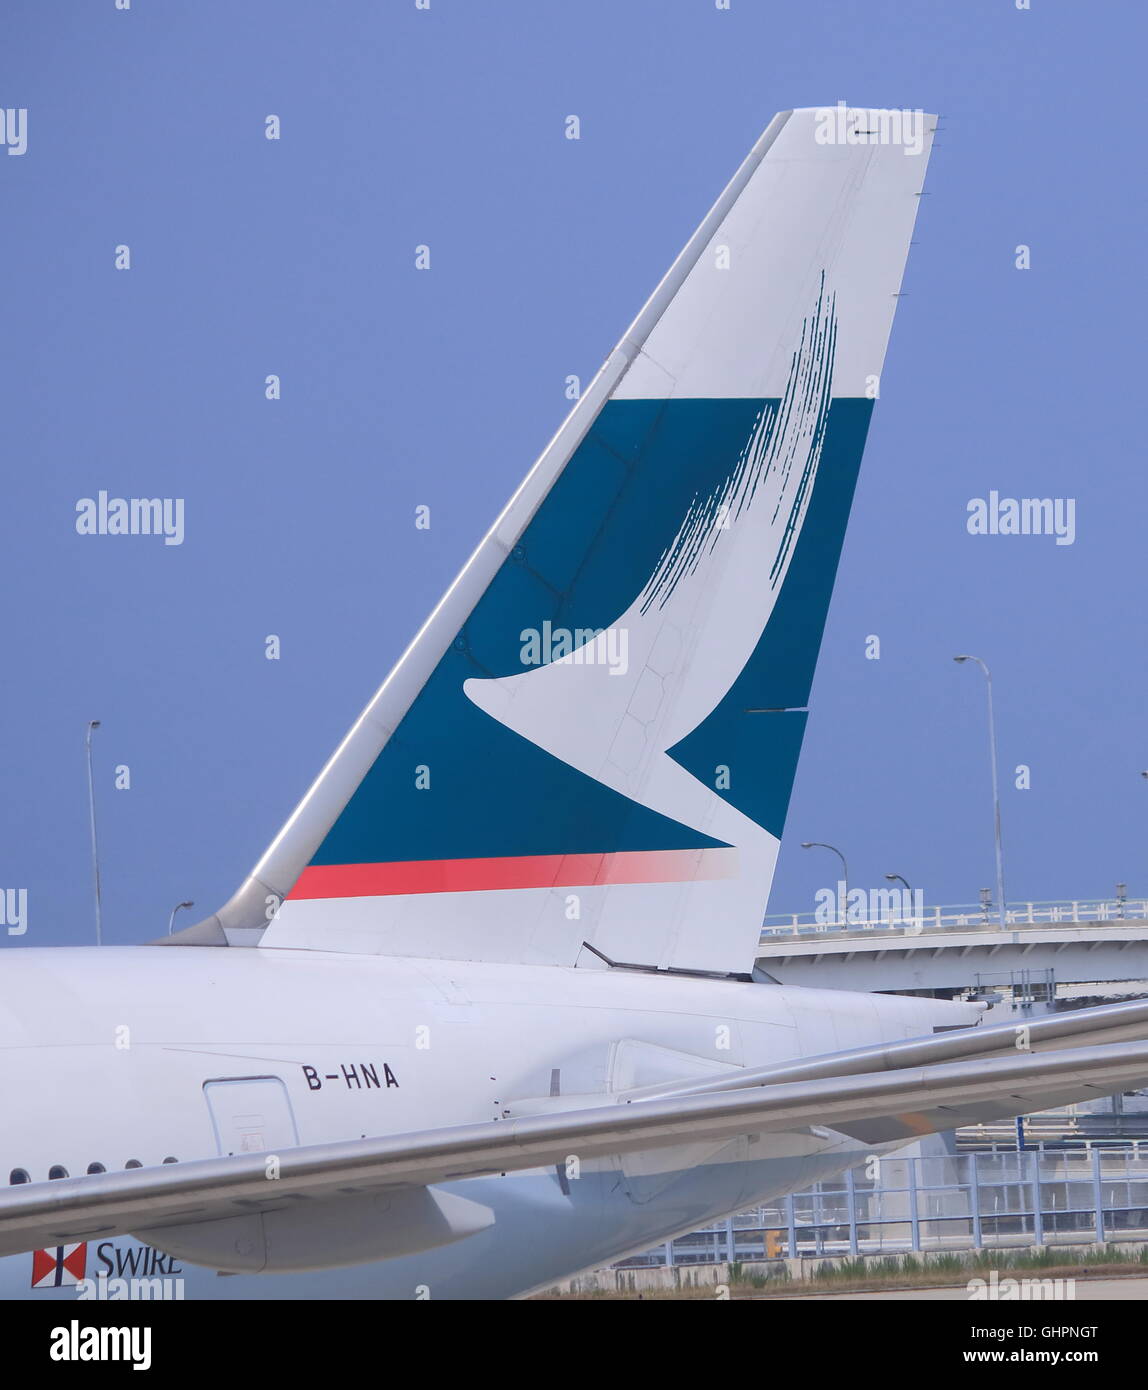 Cathay Pacific airplane, the de facto international flag carrier airline of Hong Kong. Stock Photo